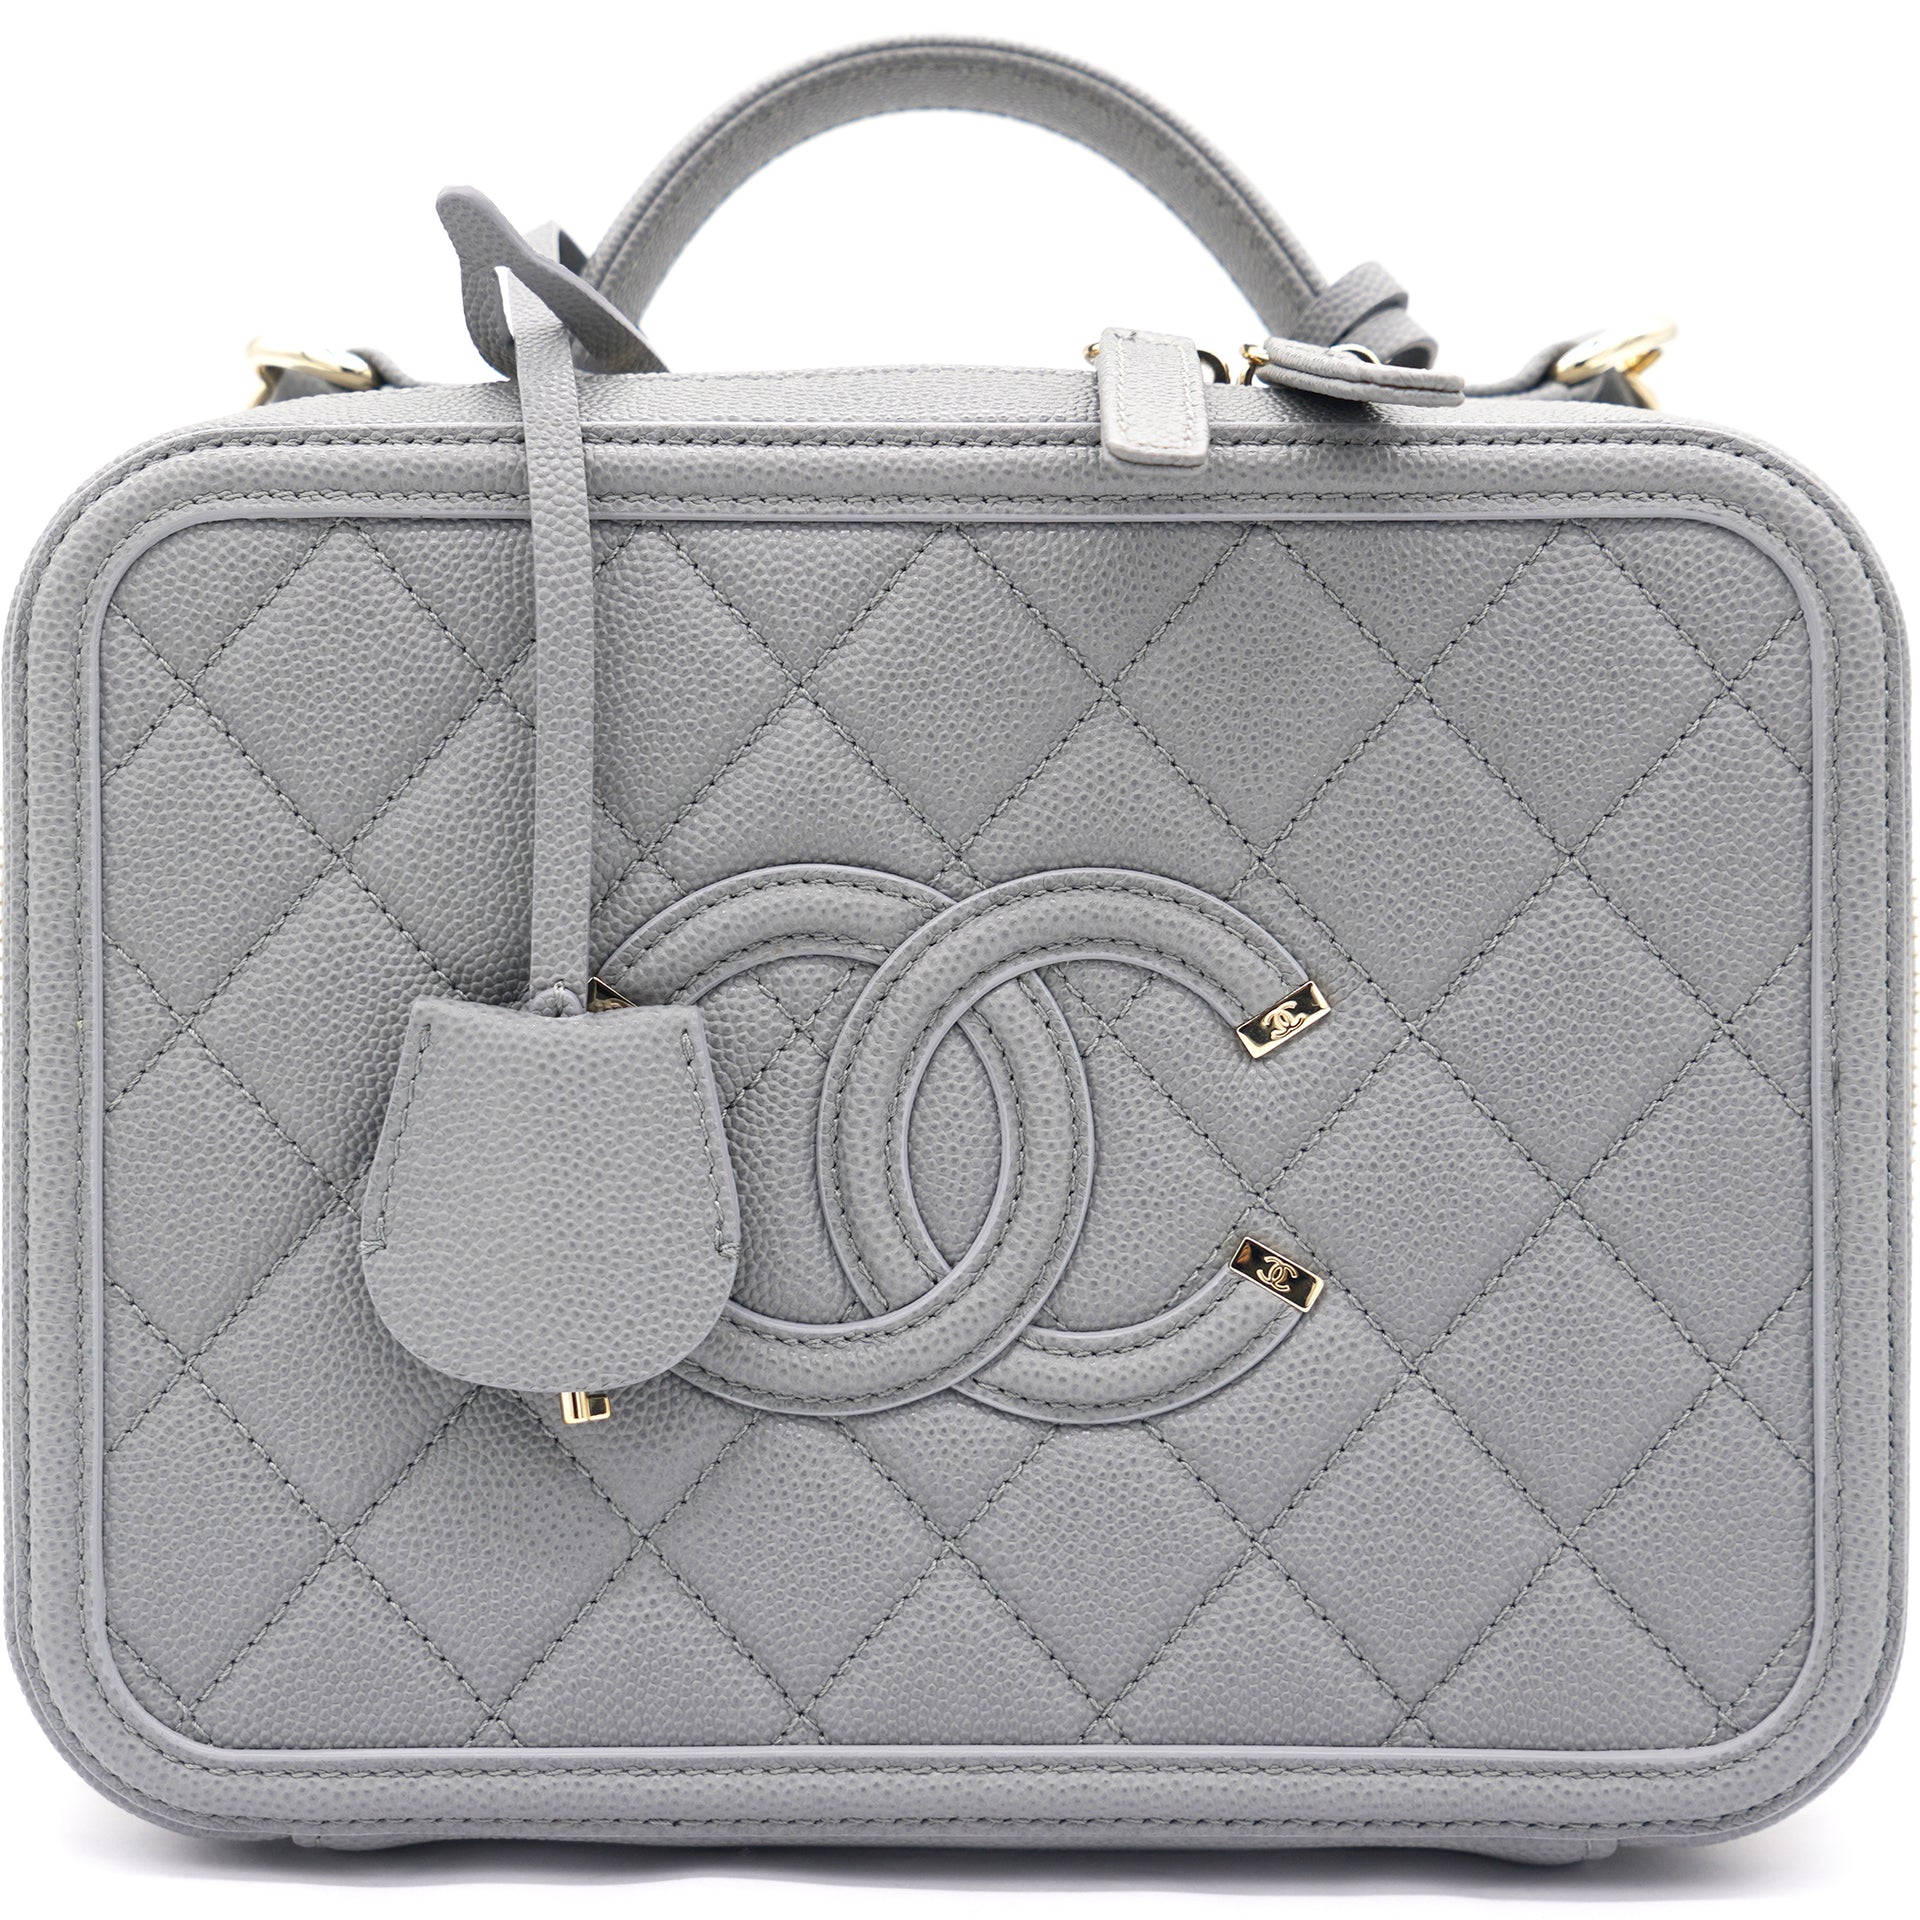 Chanel Silver Quilted Caviar Leather Large Filigree Vanity Bag